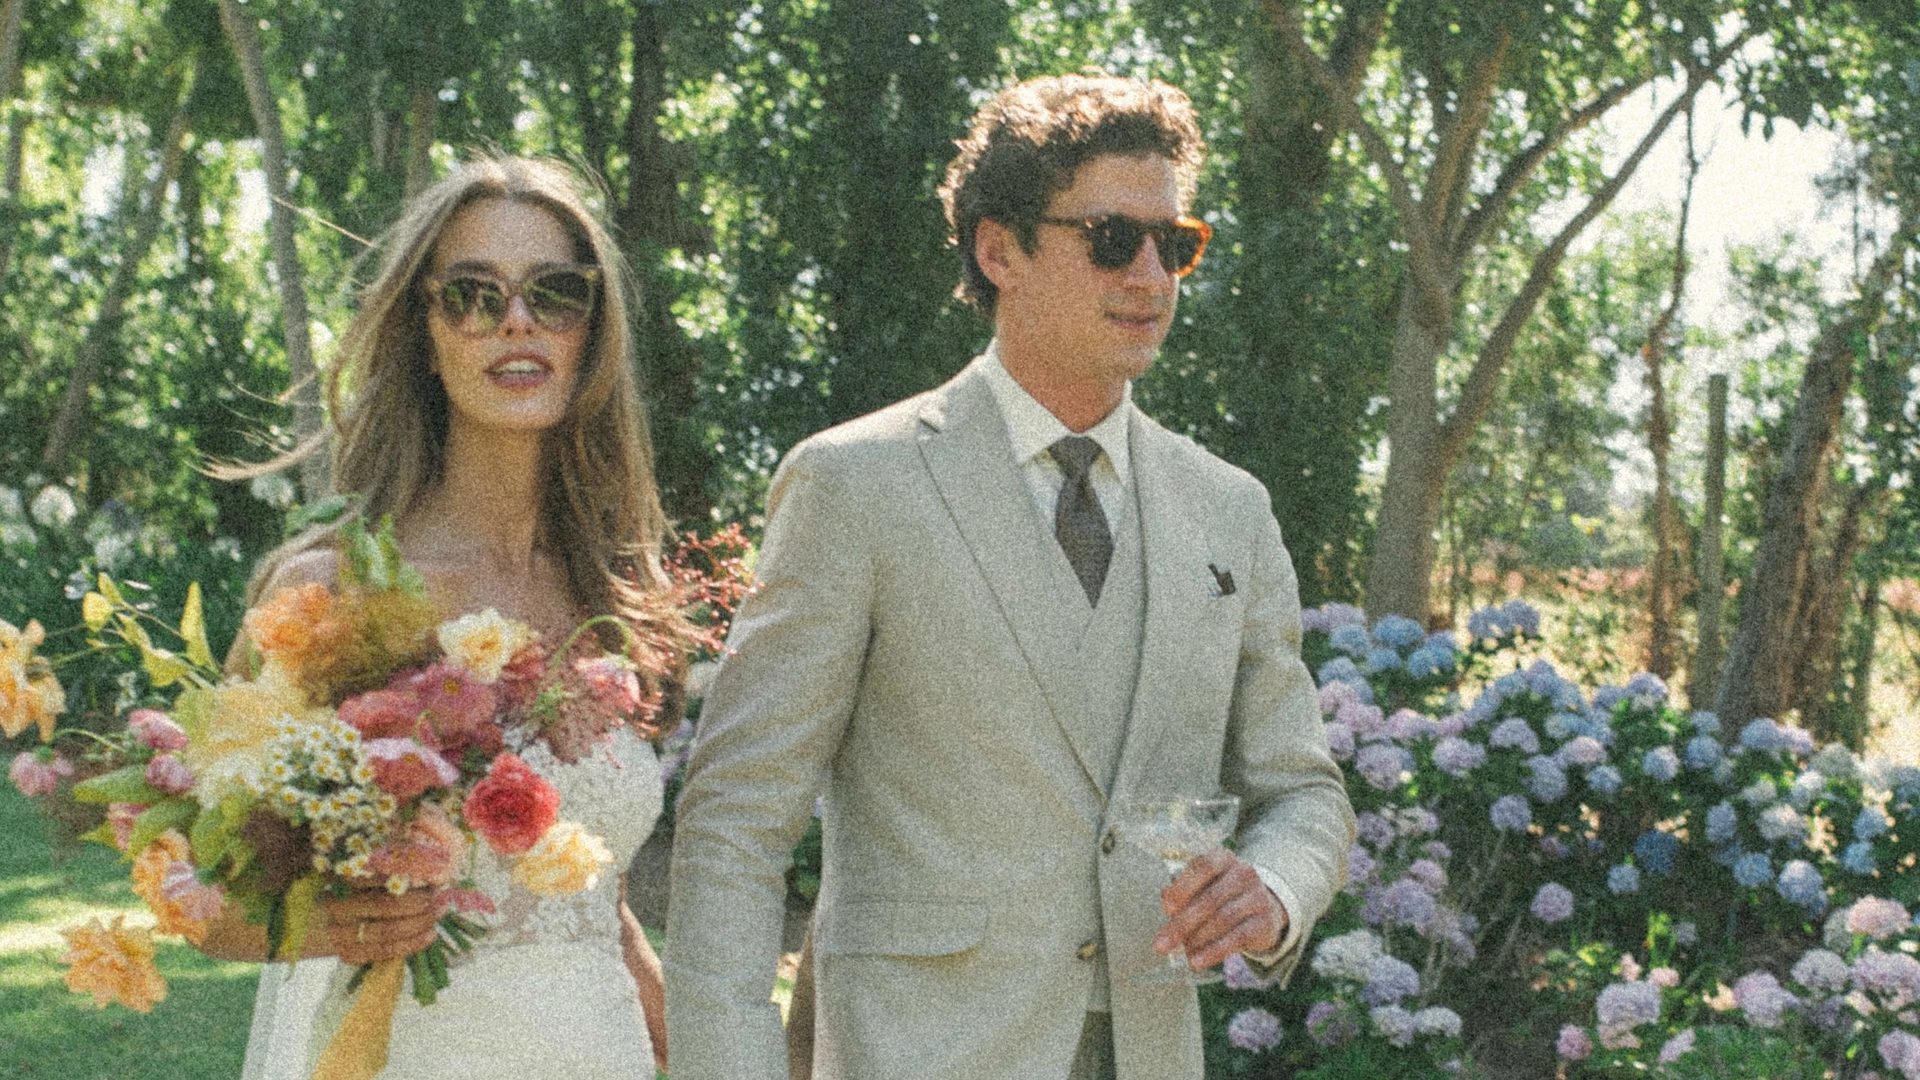 Bride and groom with sunglasses and tailored beige linen suit